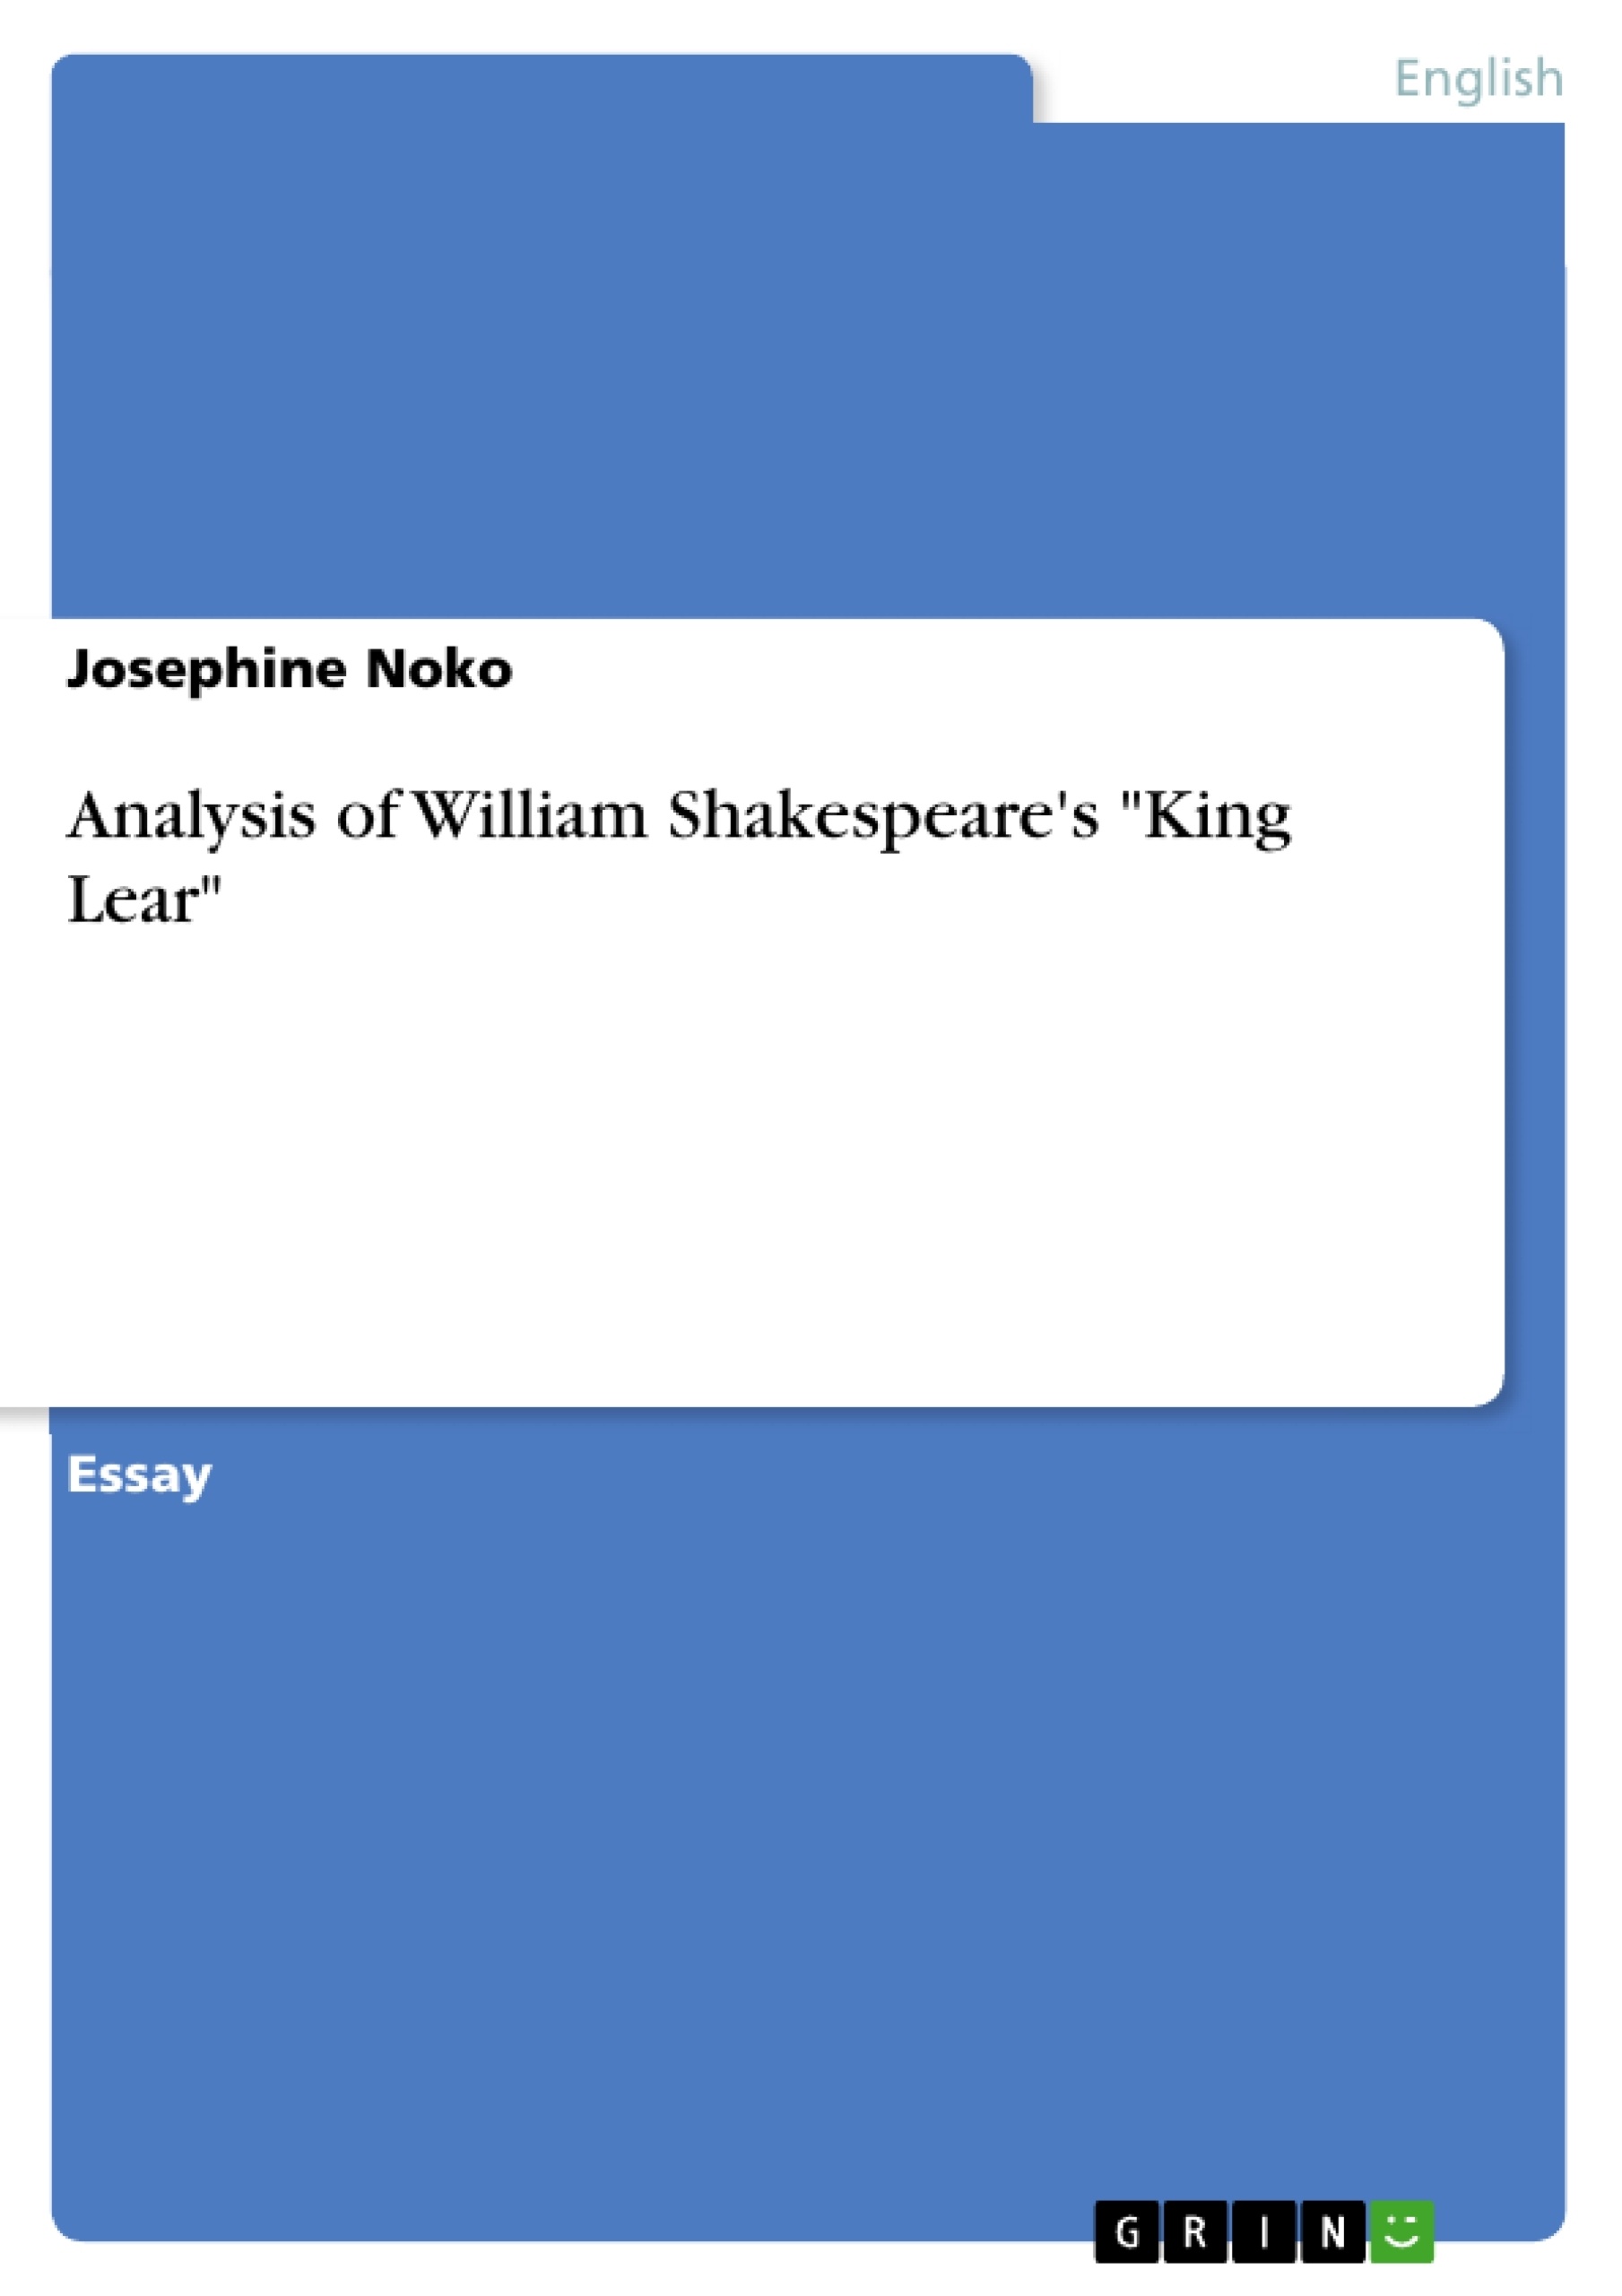 Title: Analysis of William Shakespeare's "King Lear"